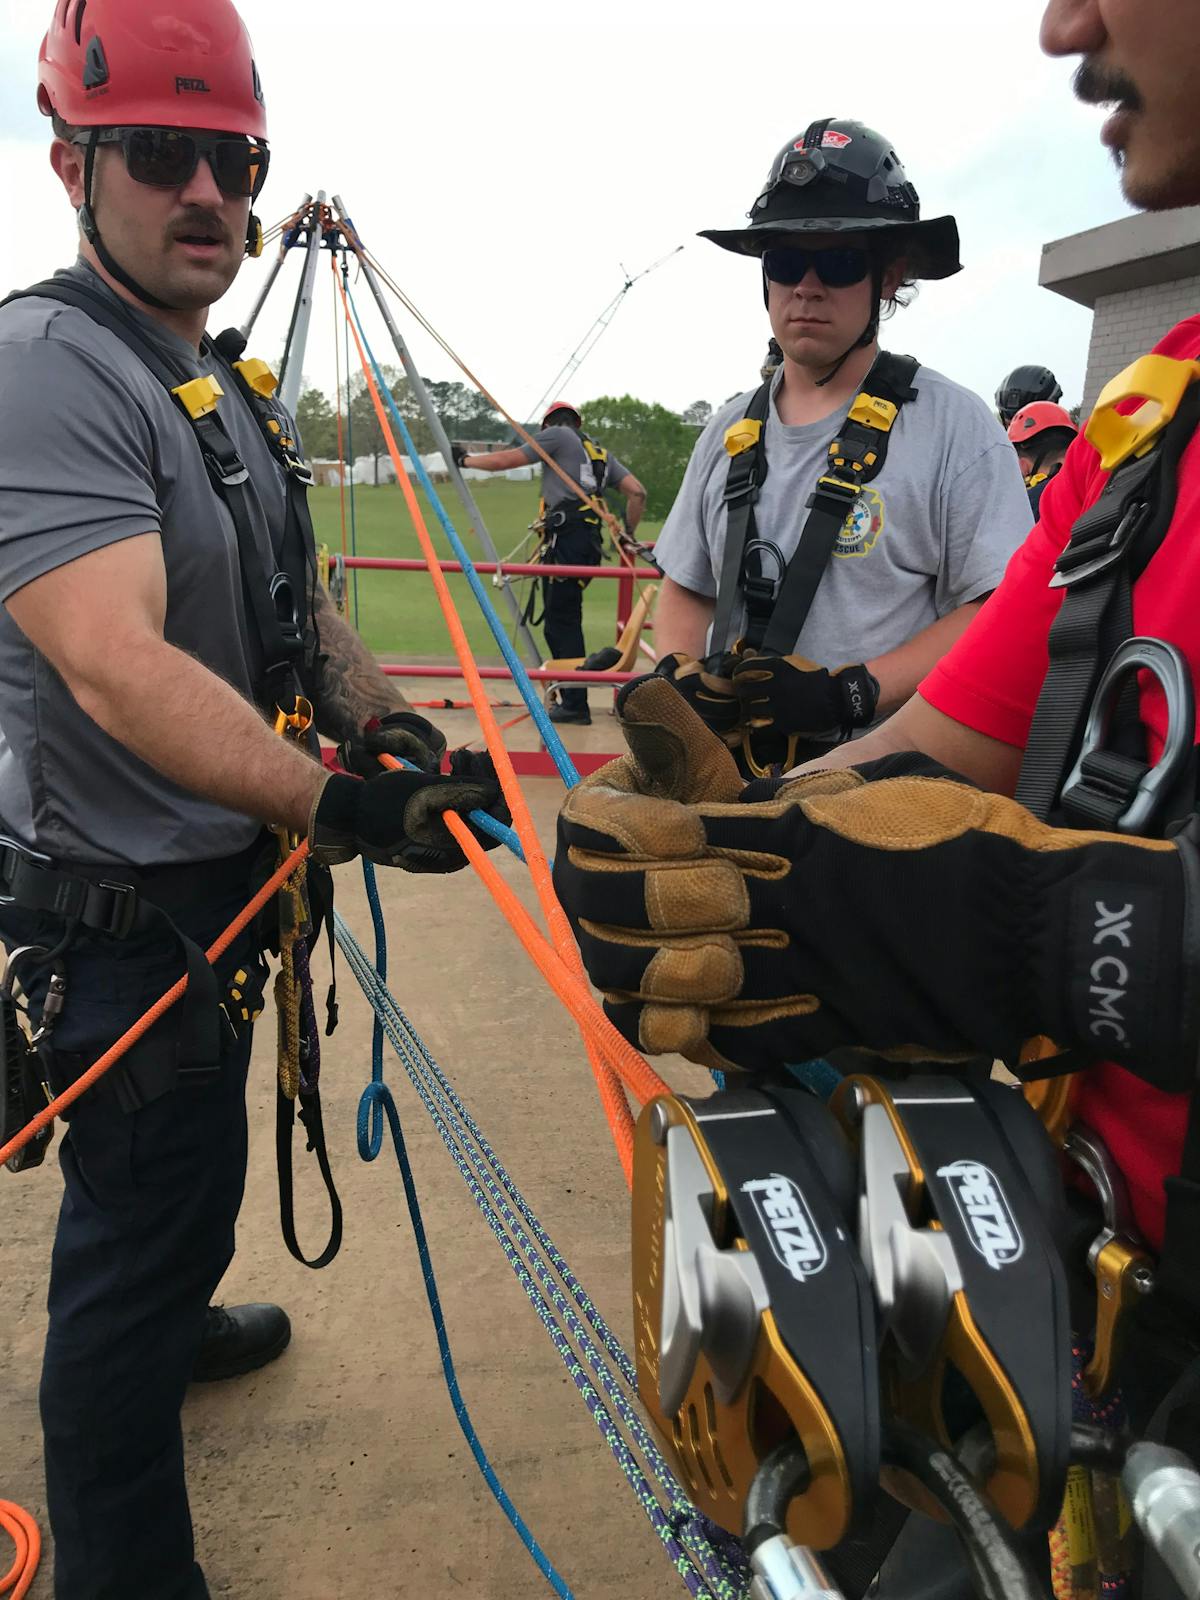 What Are the Facts vs. the Myths of Rope Rescue